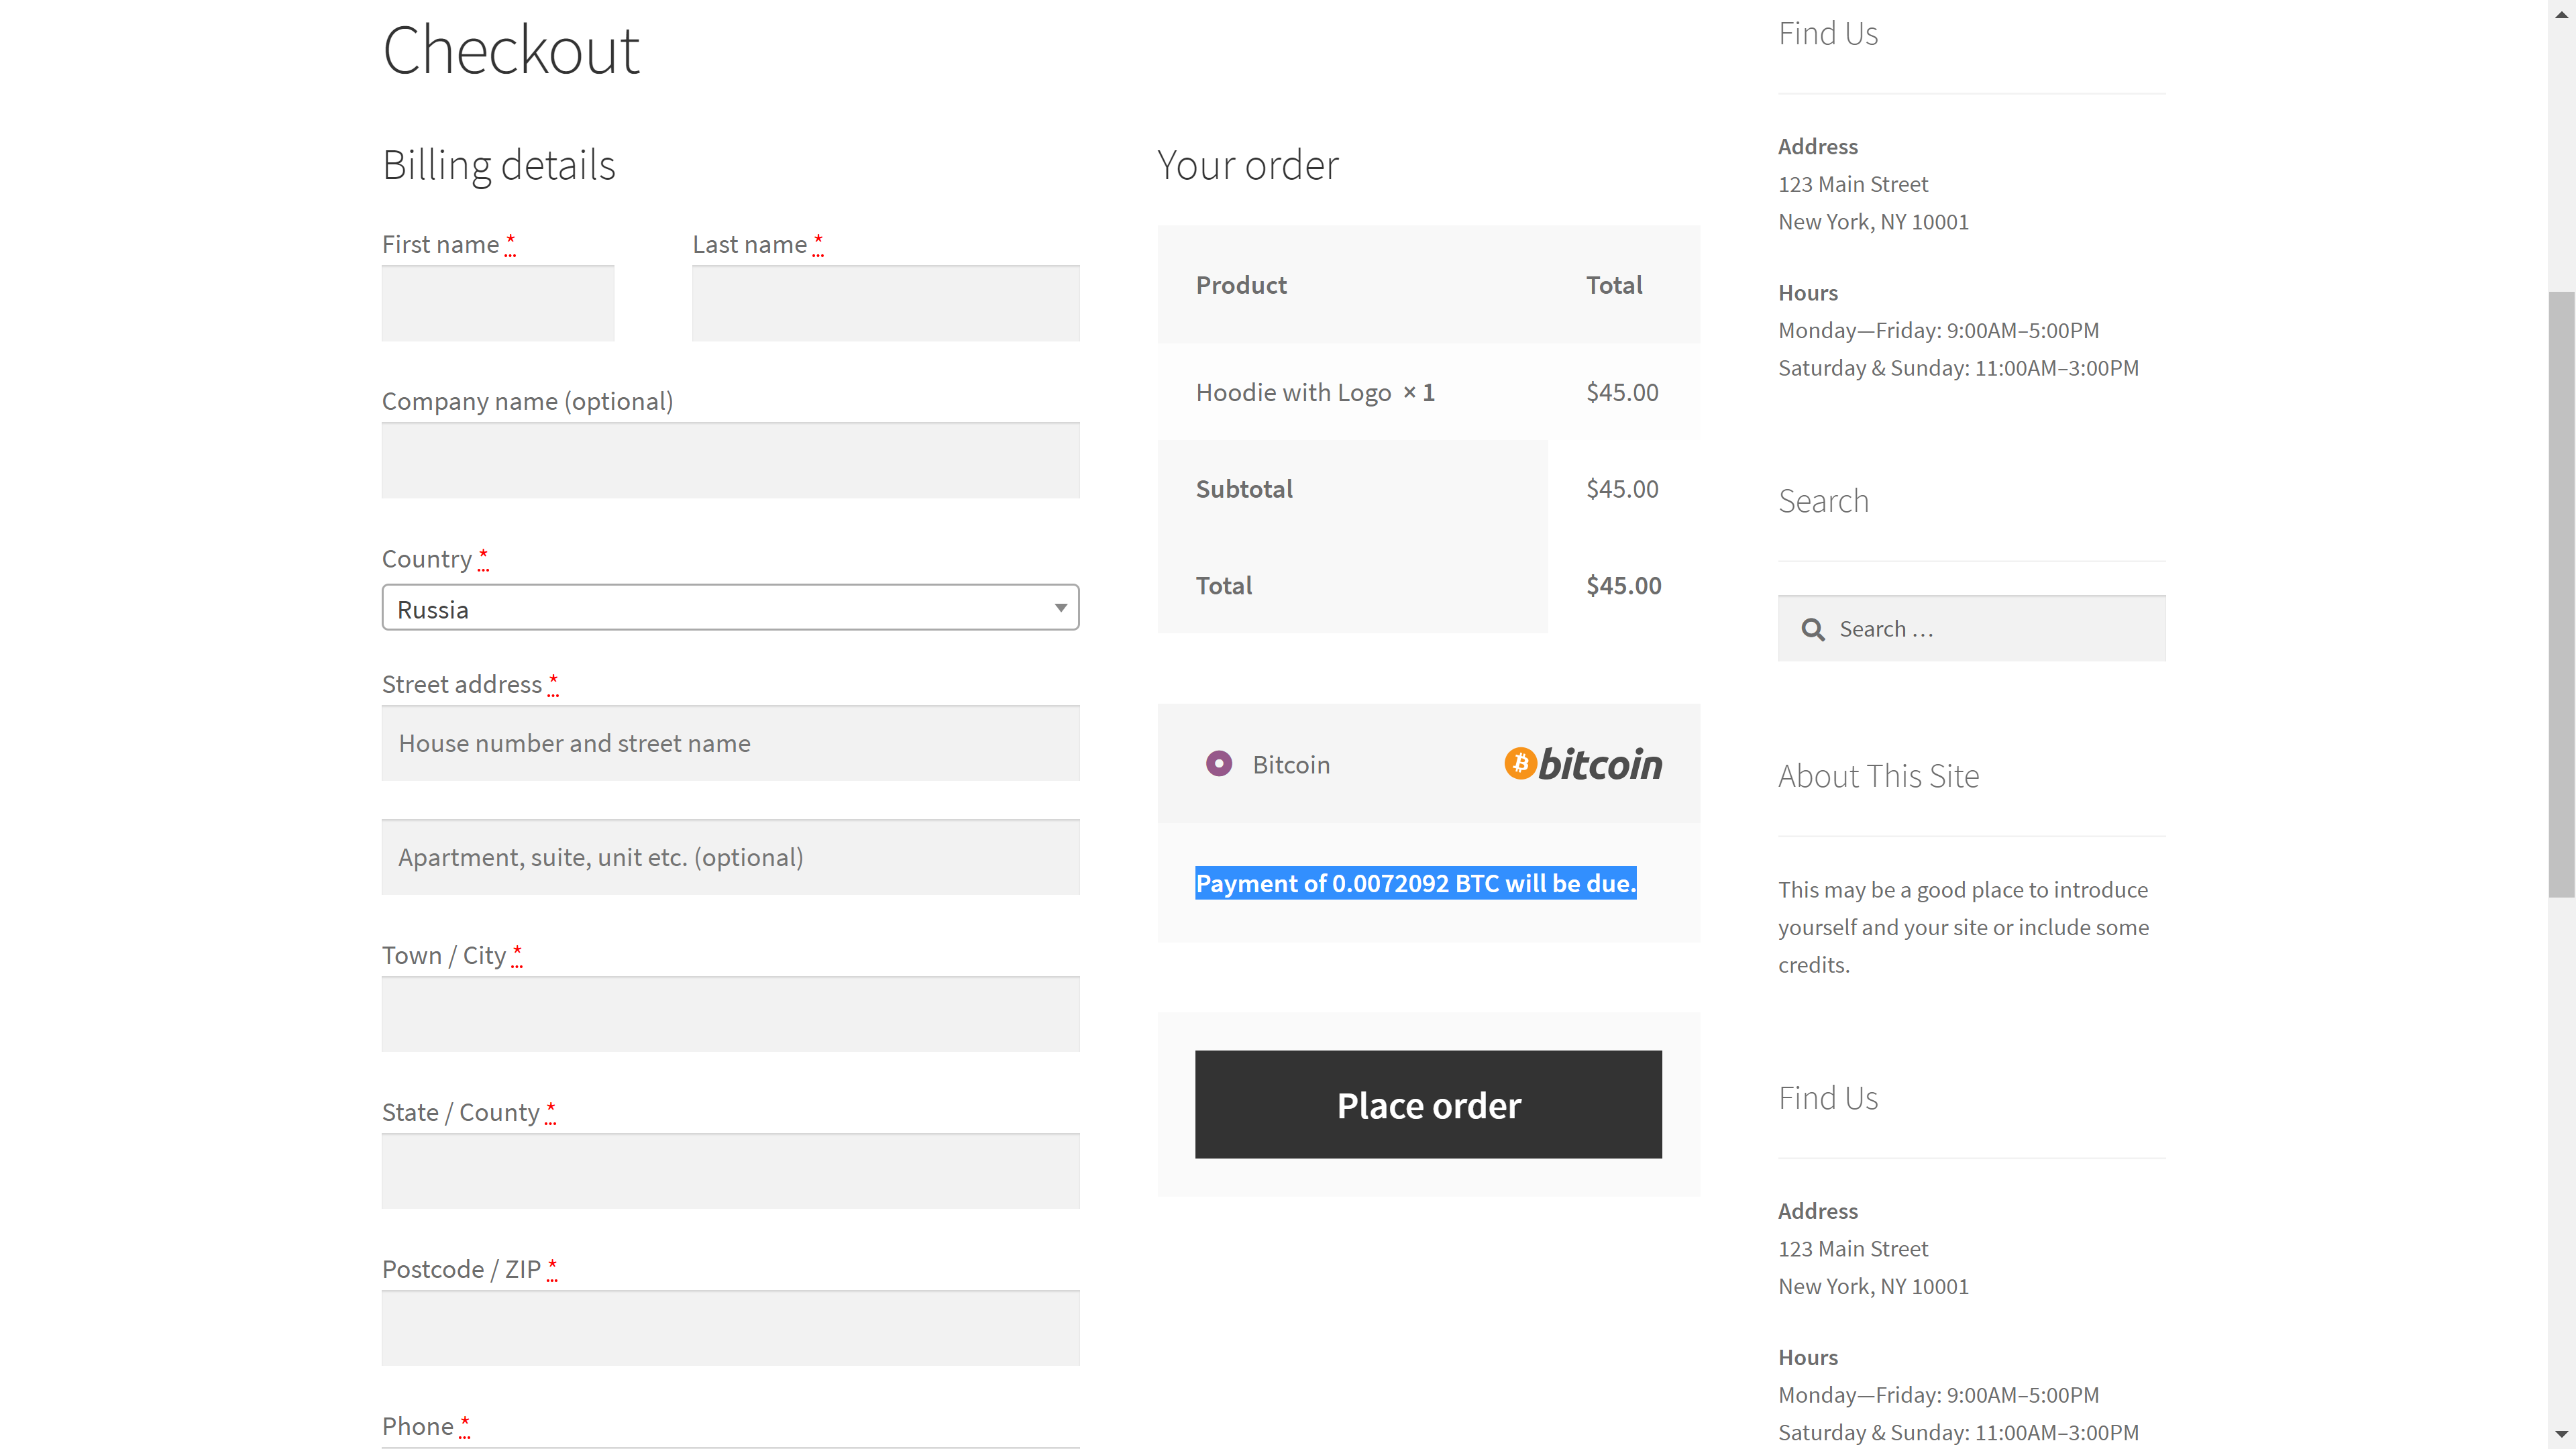 The store checkout page with pre-calculated amount in Bitcoins